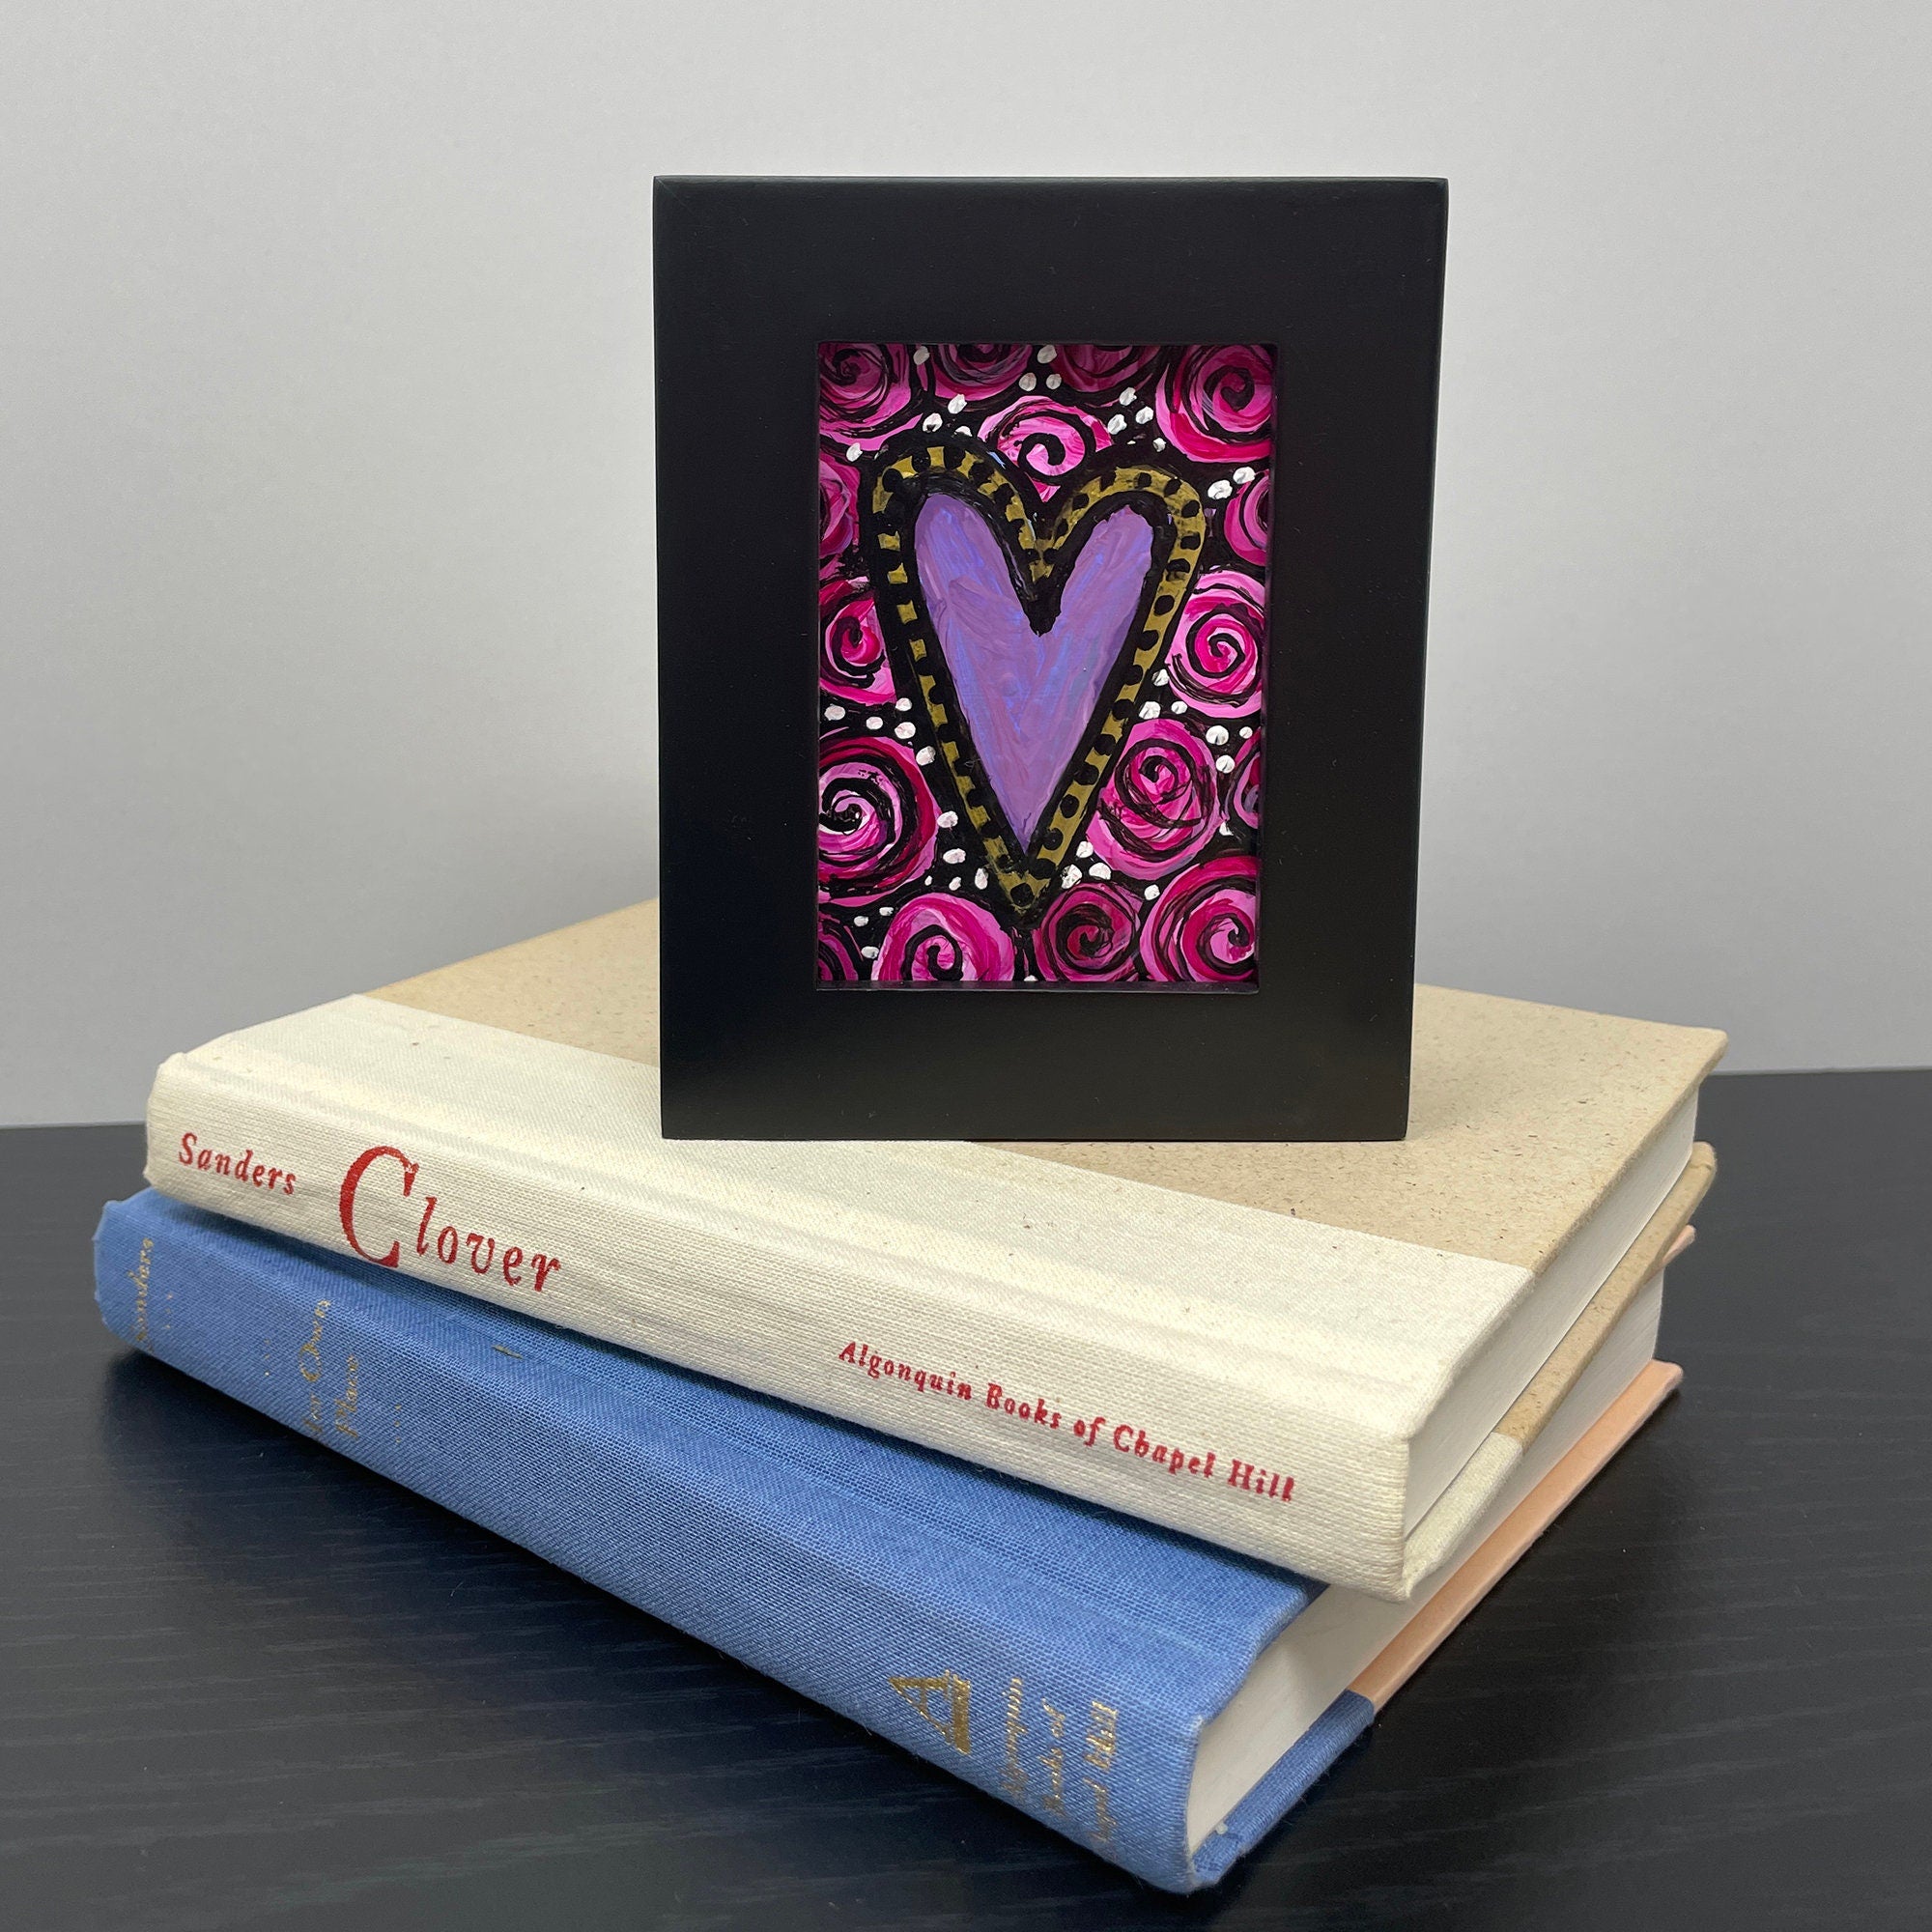 Framed Rose Heart Mini Painting - Framed ACEO - Artist Trading Card - Valentine's Day or Anniversary Gift